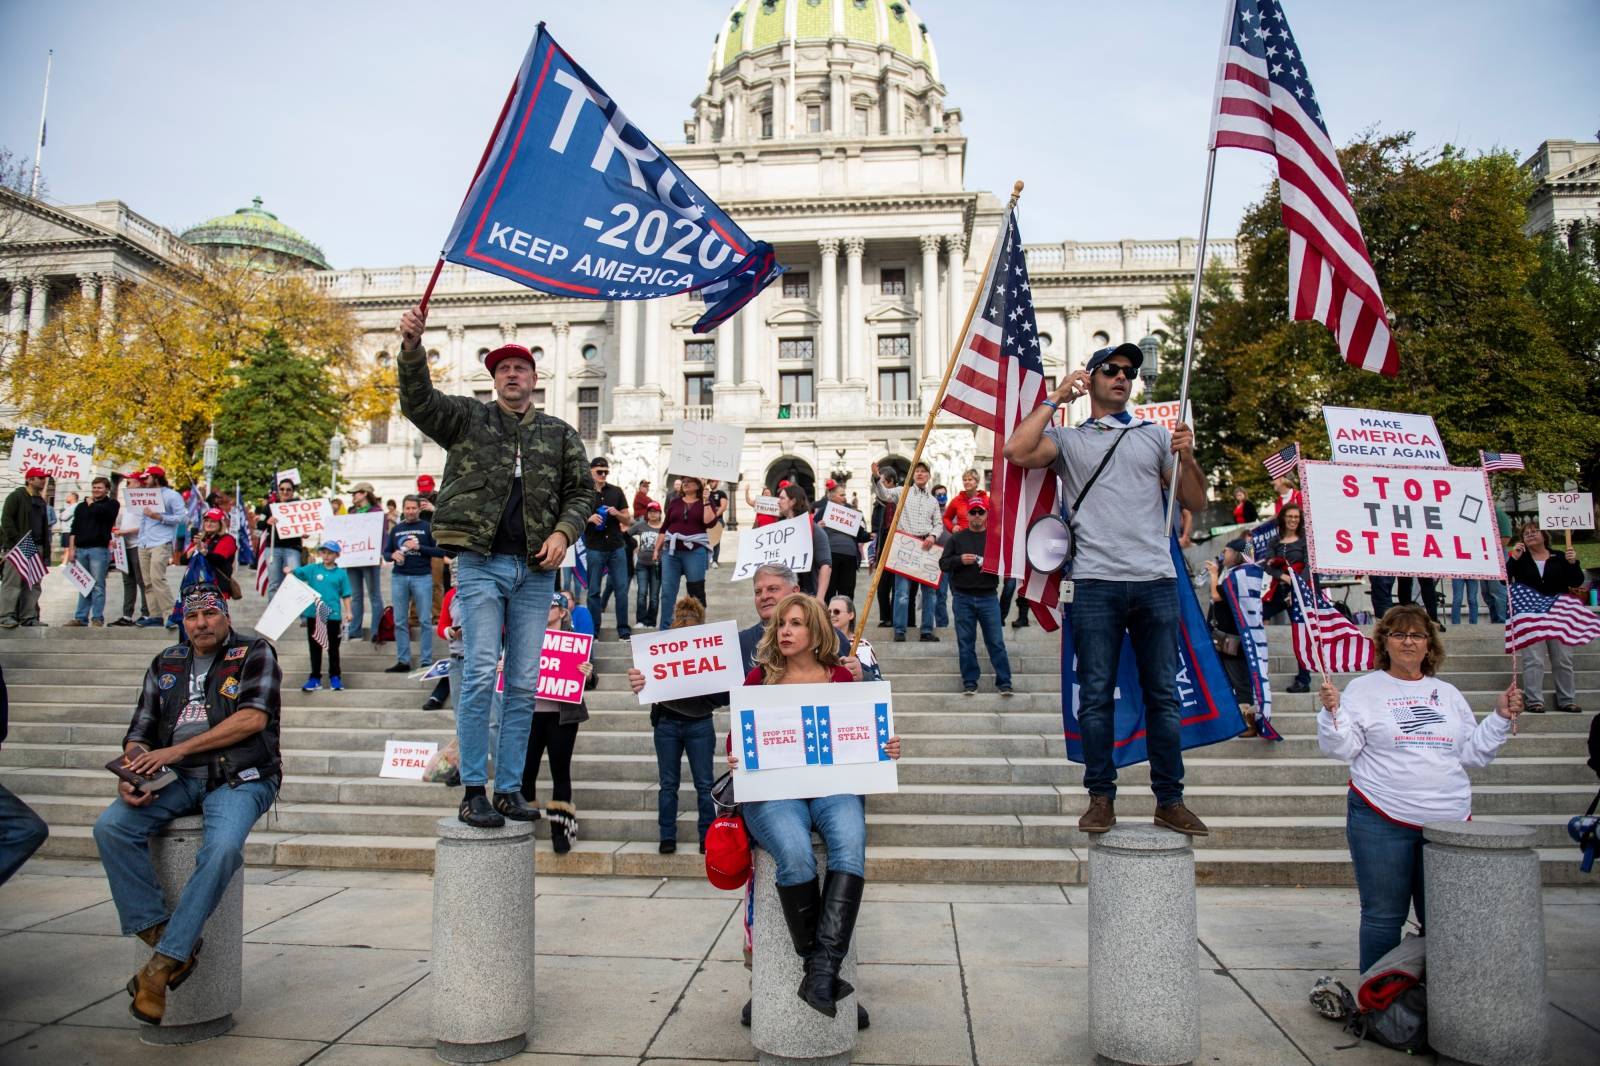 Supporters of U.S. President Donald Trump protest in front of the Pennsylvania Commonwealth capitol building in Harrisburg